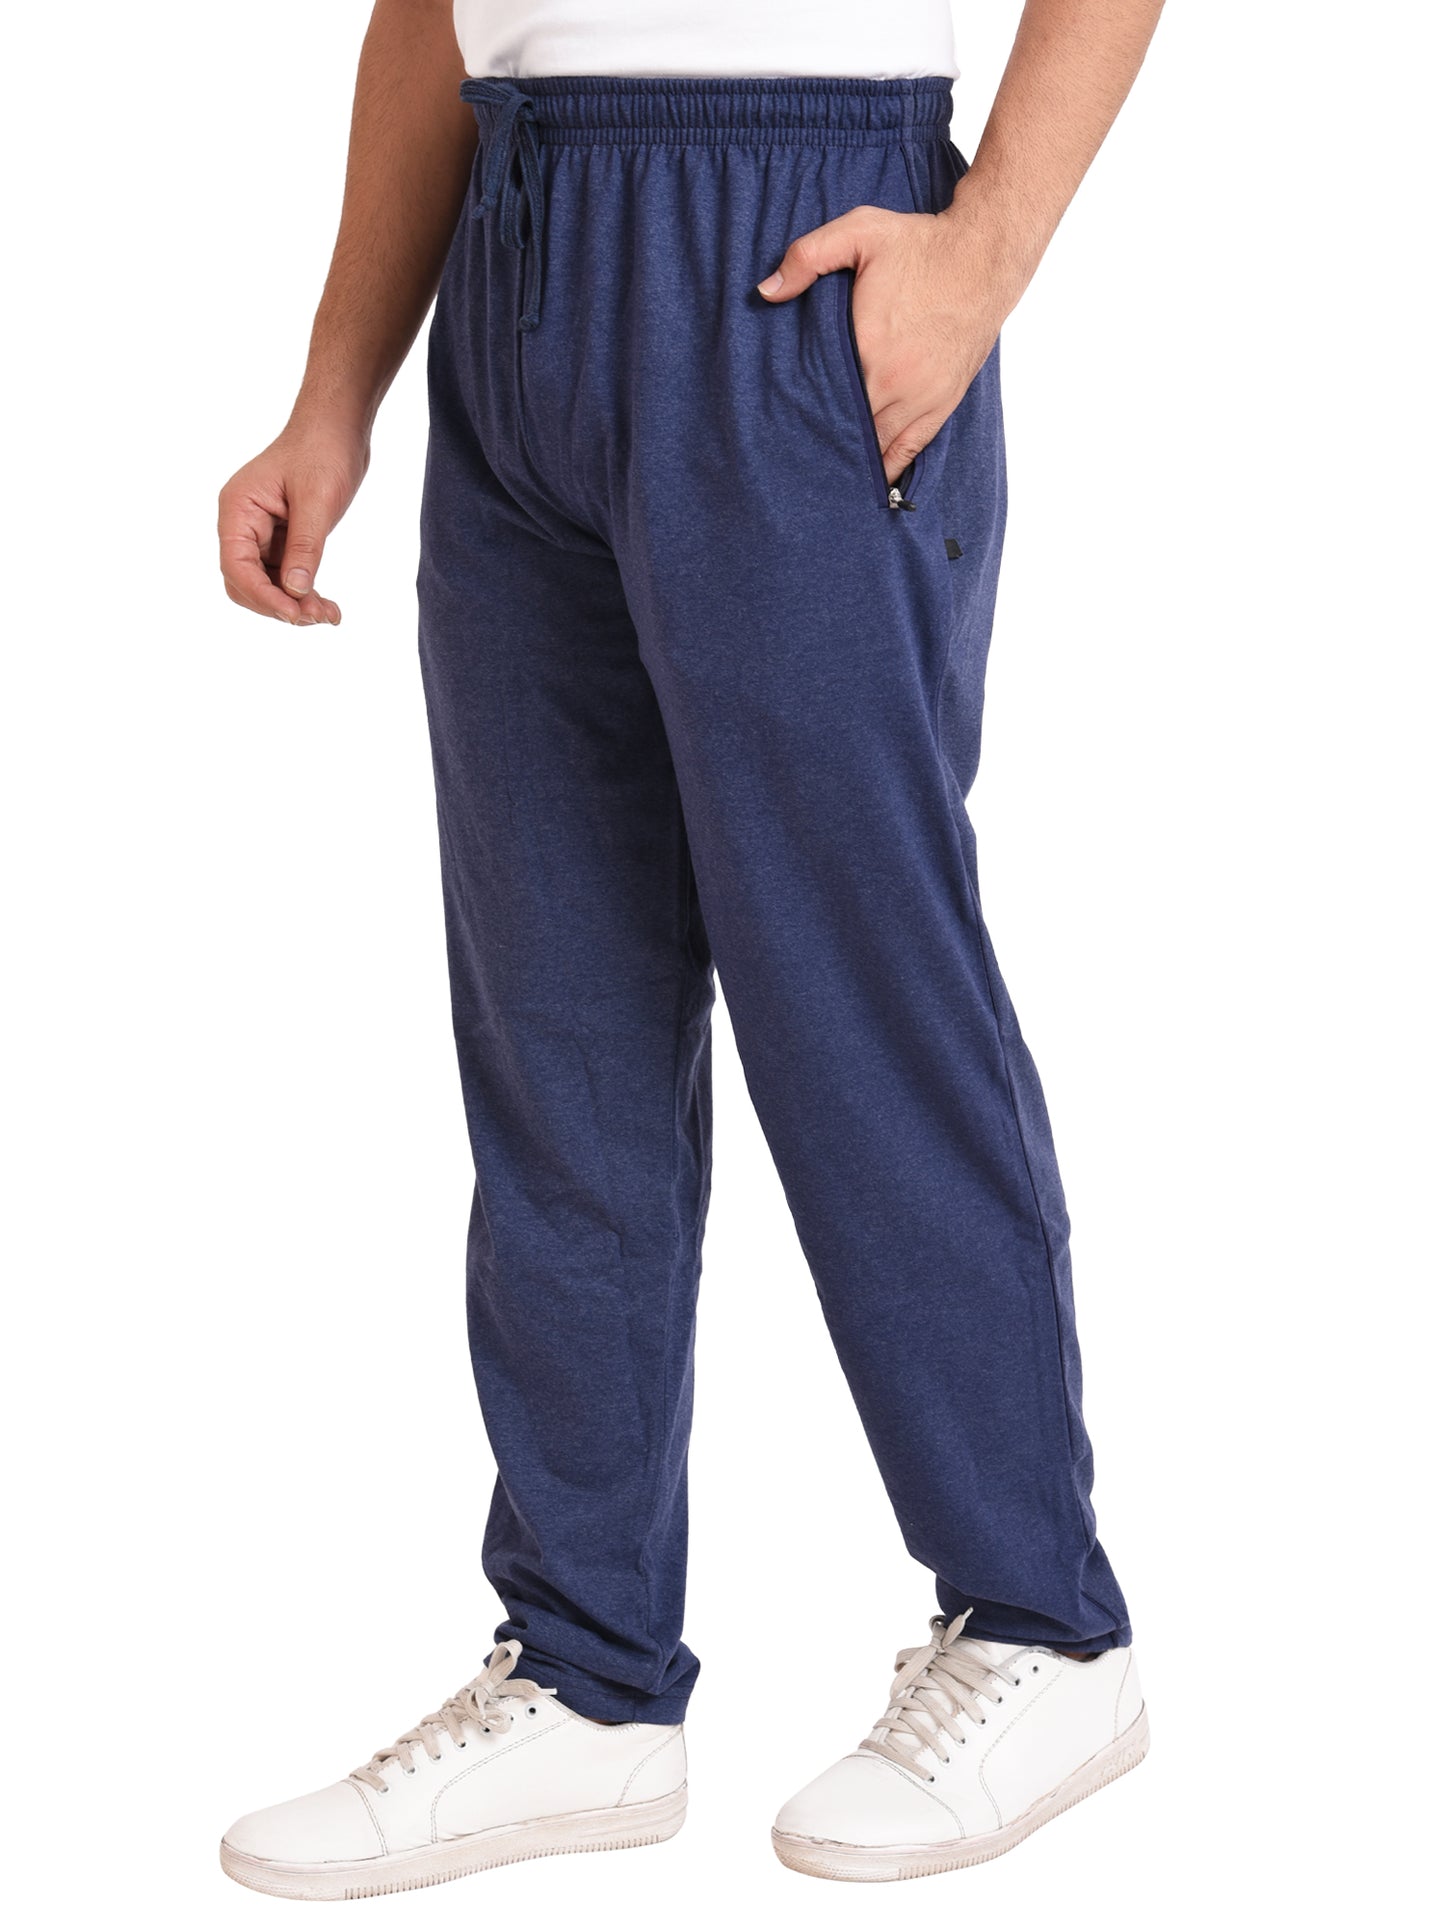 NEO GARMENTS Men's Cotton TRACK PANTS | DENIM BLUE | SIZES FROM M TO 9XL.